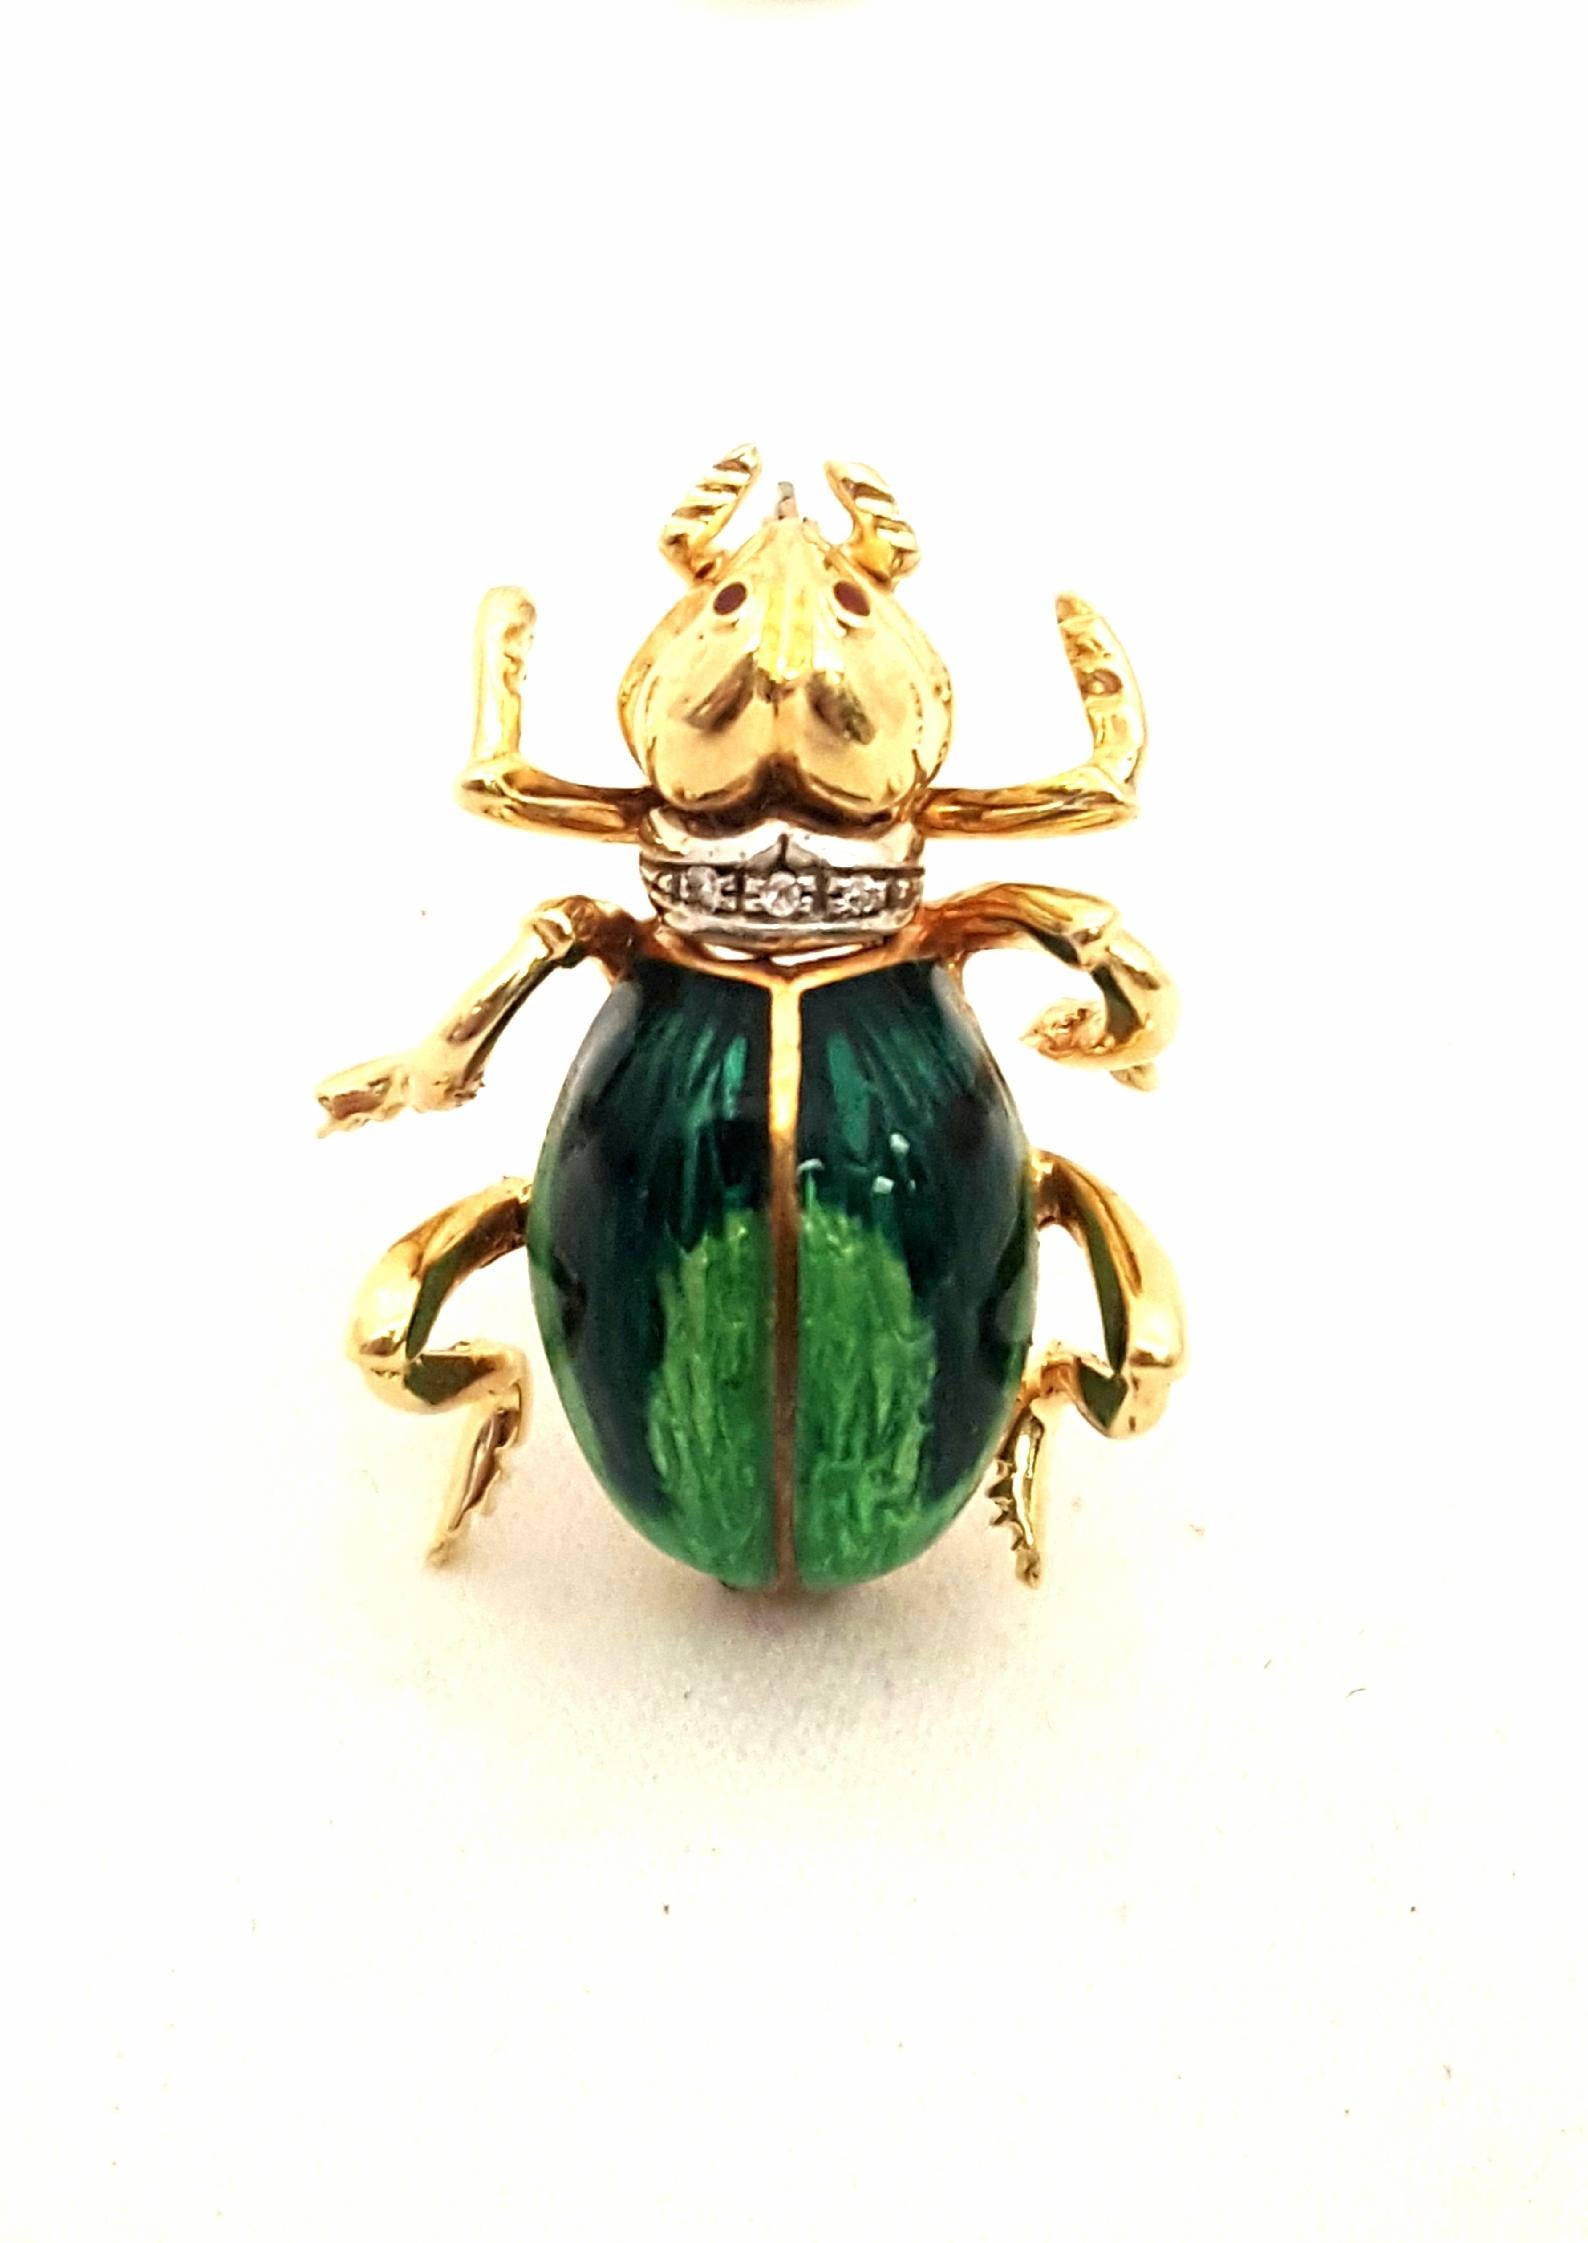 What's all the buzz?  It's compliments on this extraordinary bee brooch meticulously crafted in 18 karat yellow gold.  Detail is lifelike!  An ombre green enamel body and cabochon ruby eyes add interest and color.  Bee is wearing a little diamond